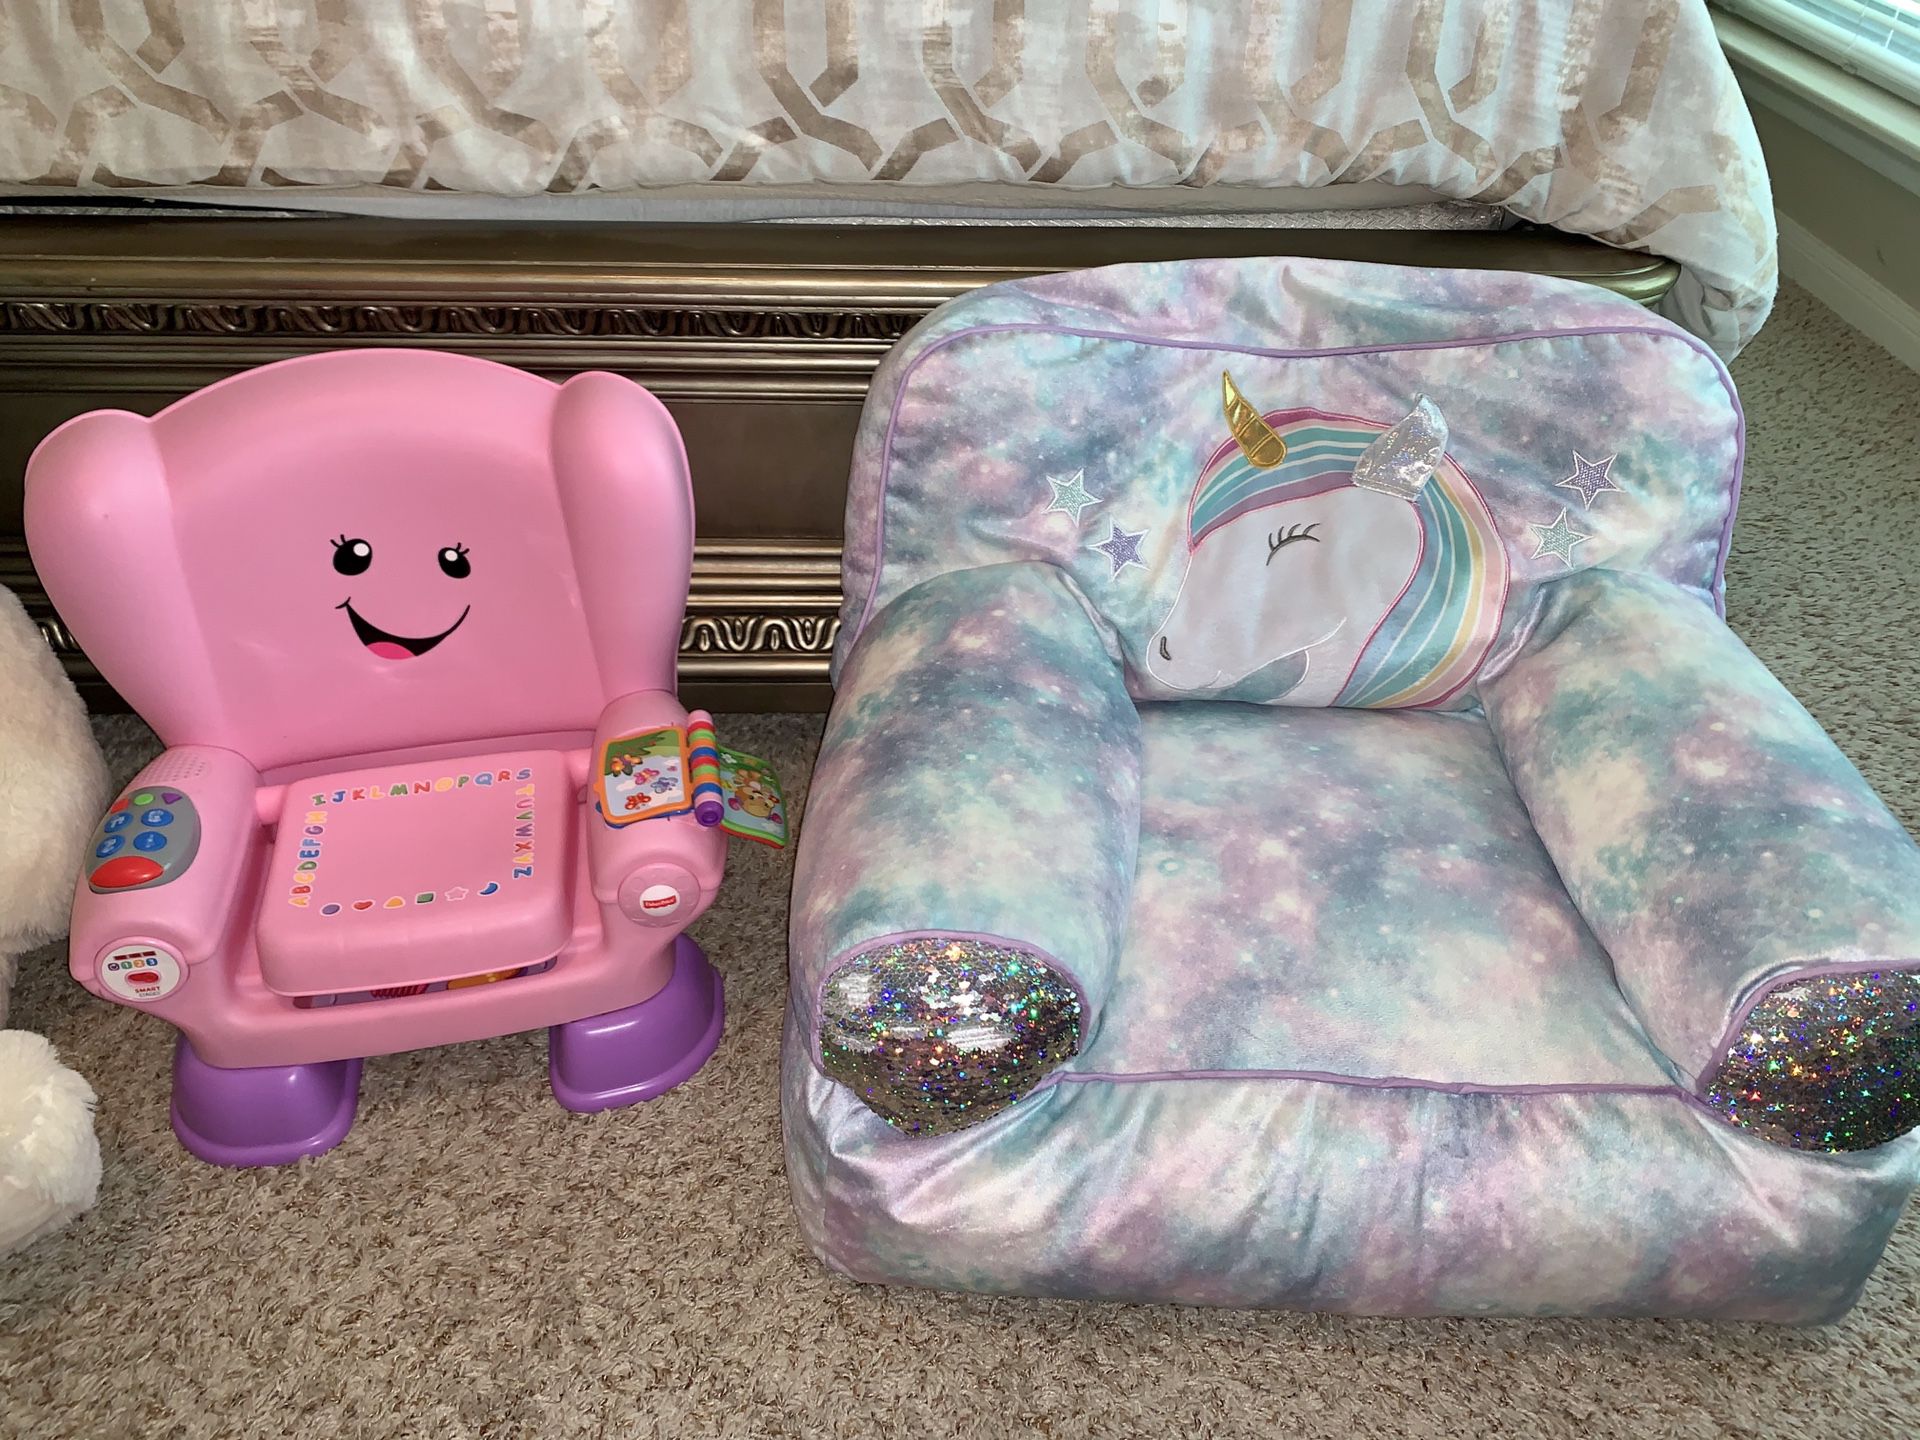 (Talking)Fisher Price Smart stages chair, Unicorn plush chair, Huge stuffed animals